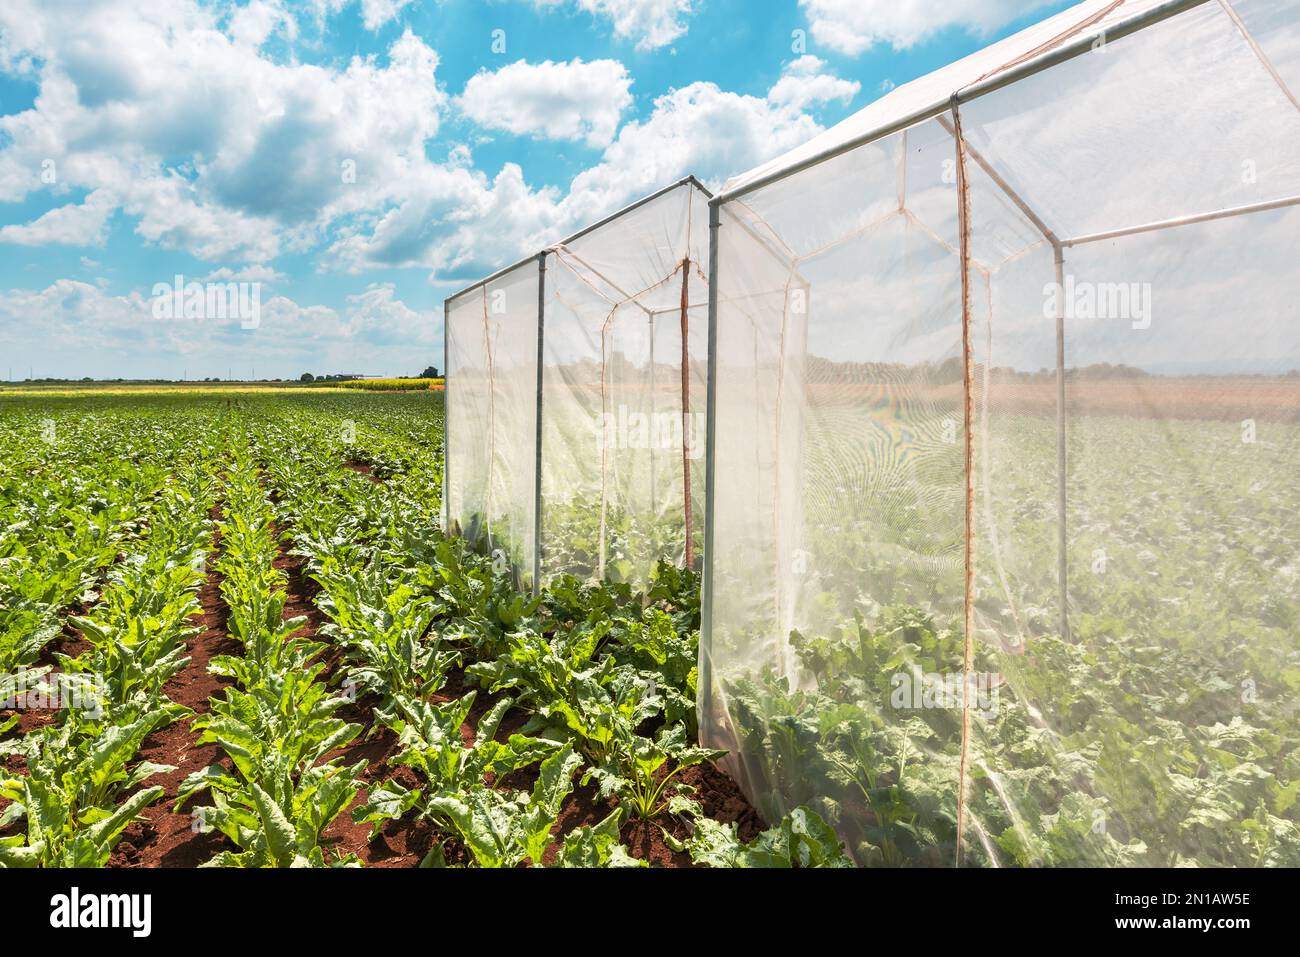 Sugar beet pollination control tents in cultivated agricultural field on sunny summer day Stock Photo